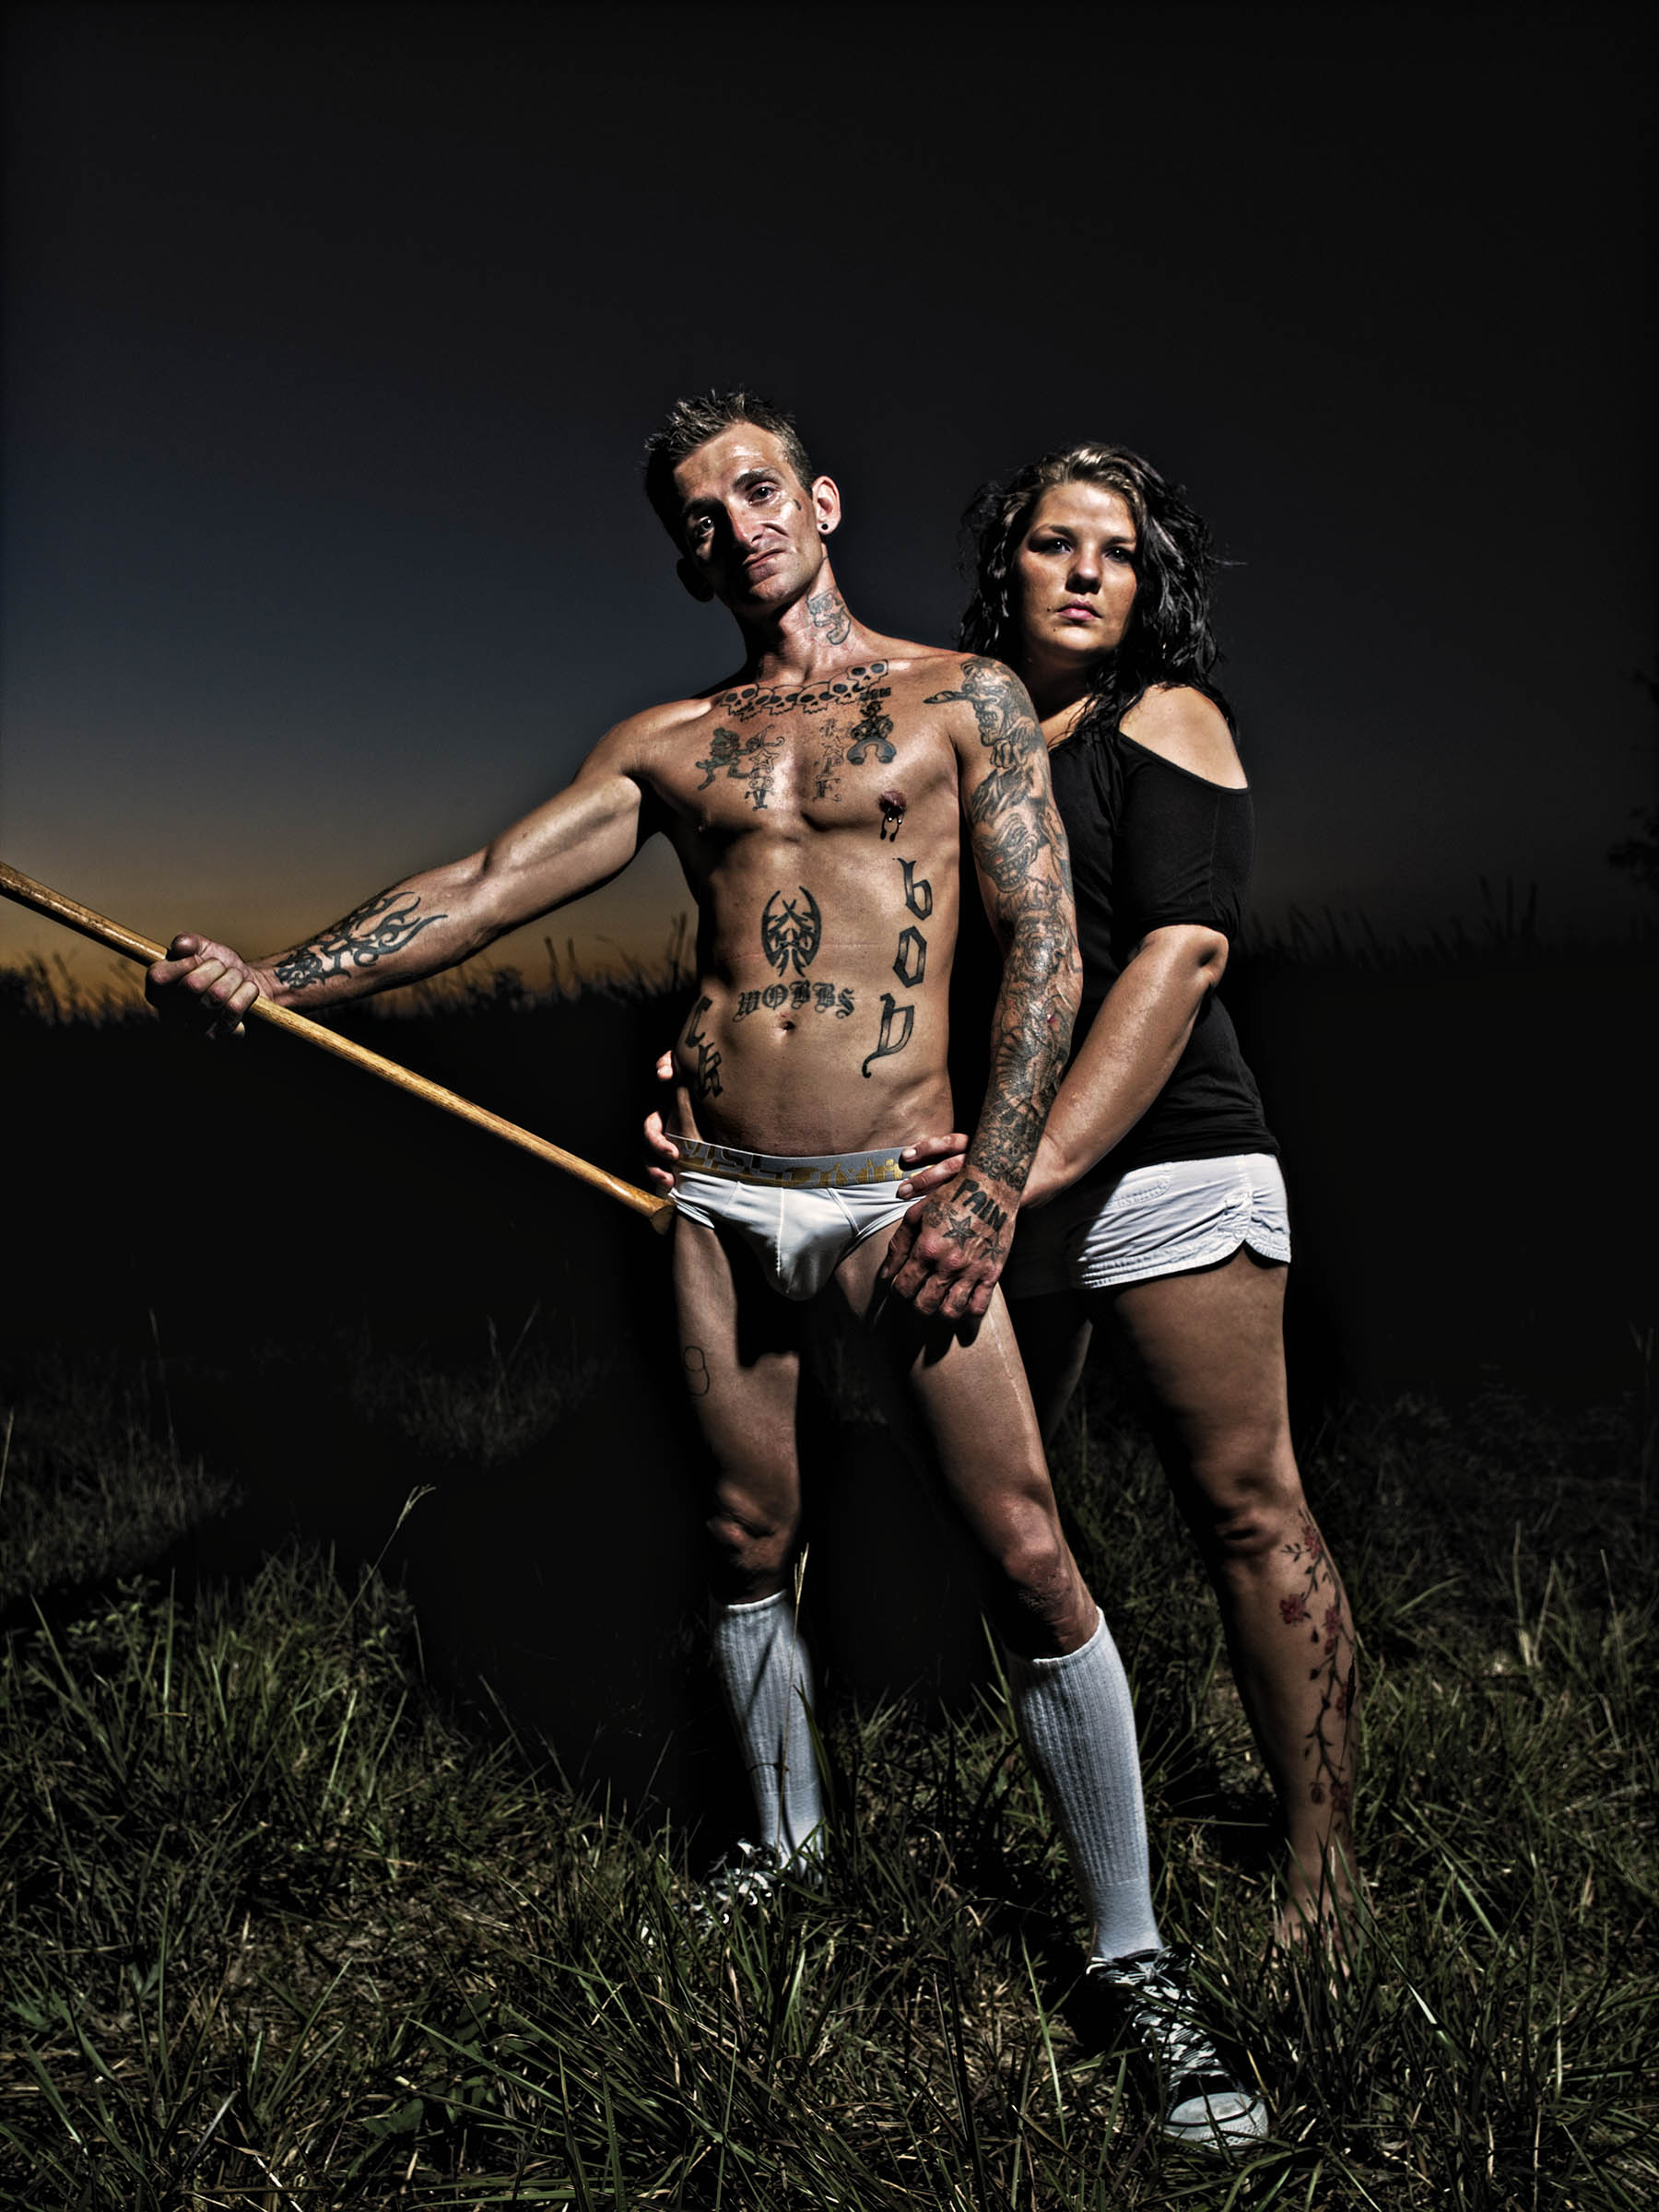 Billy Ianne, The Axe Twins, Keepers of the EverGlades, Conceptual Portrait Photography, Wick Beavers NYC Portraits